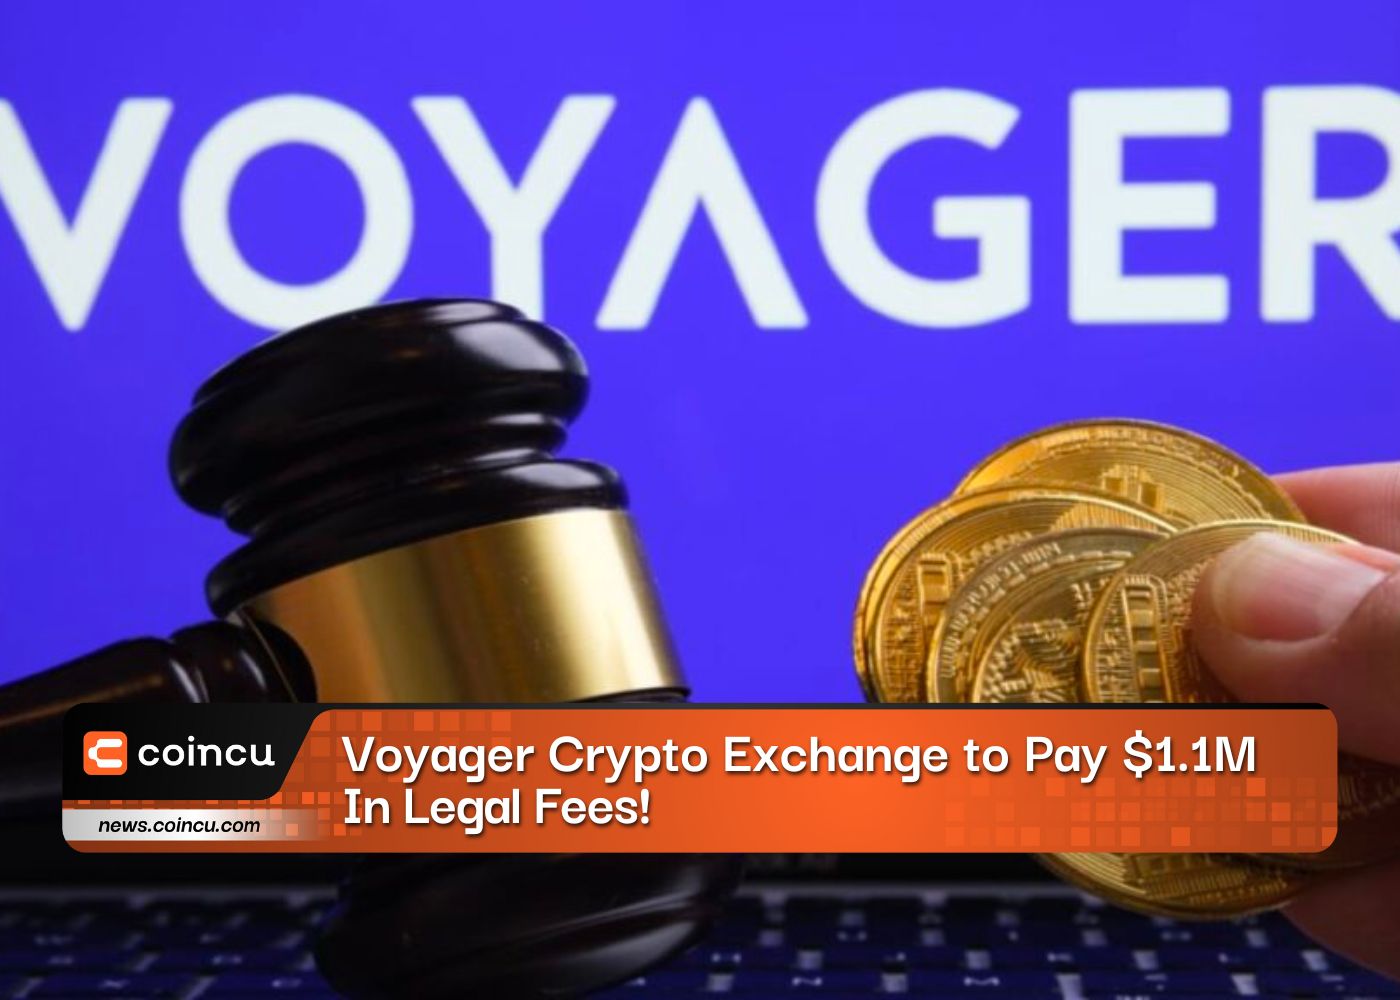 Voyager Crypto Exchange to Pay 1.1M